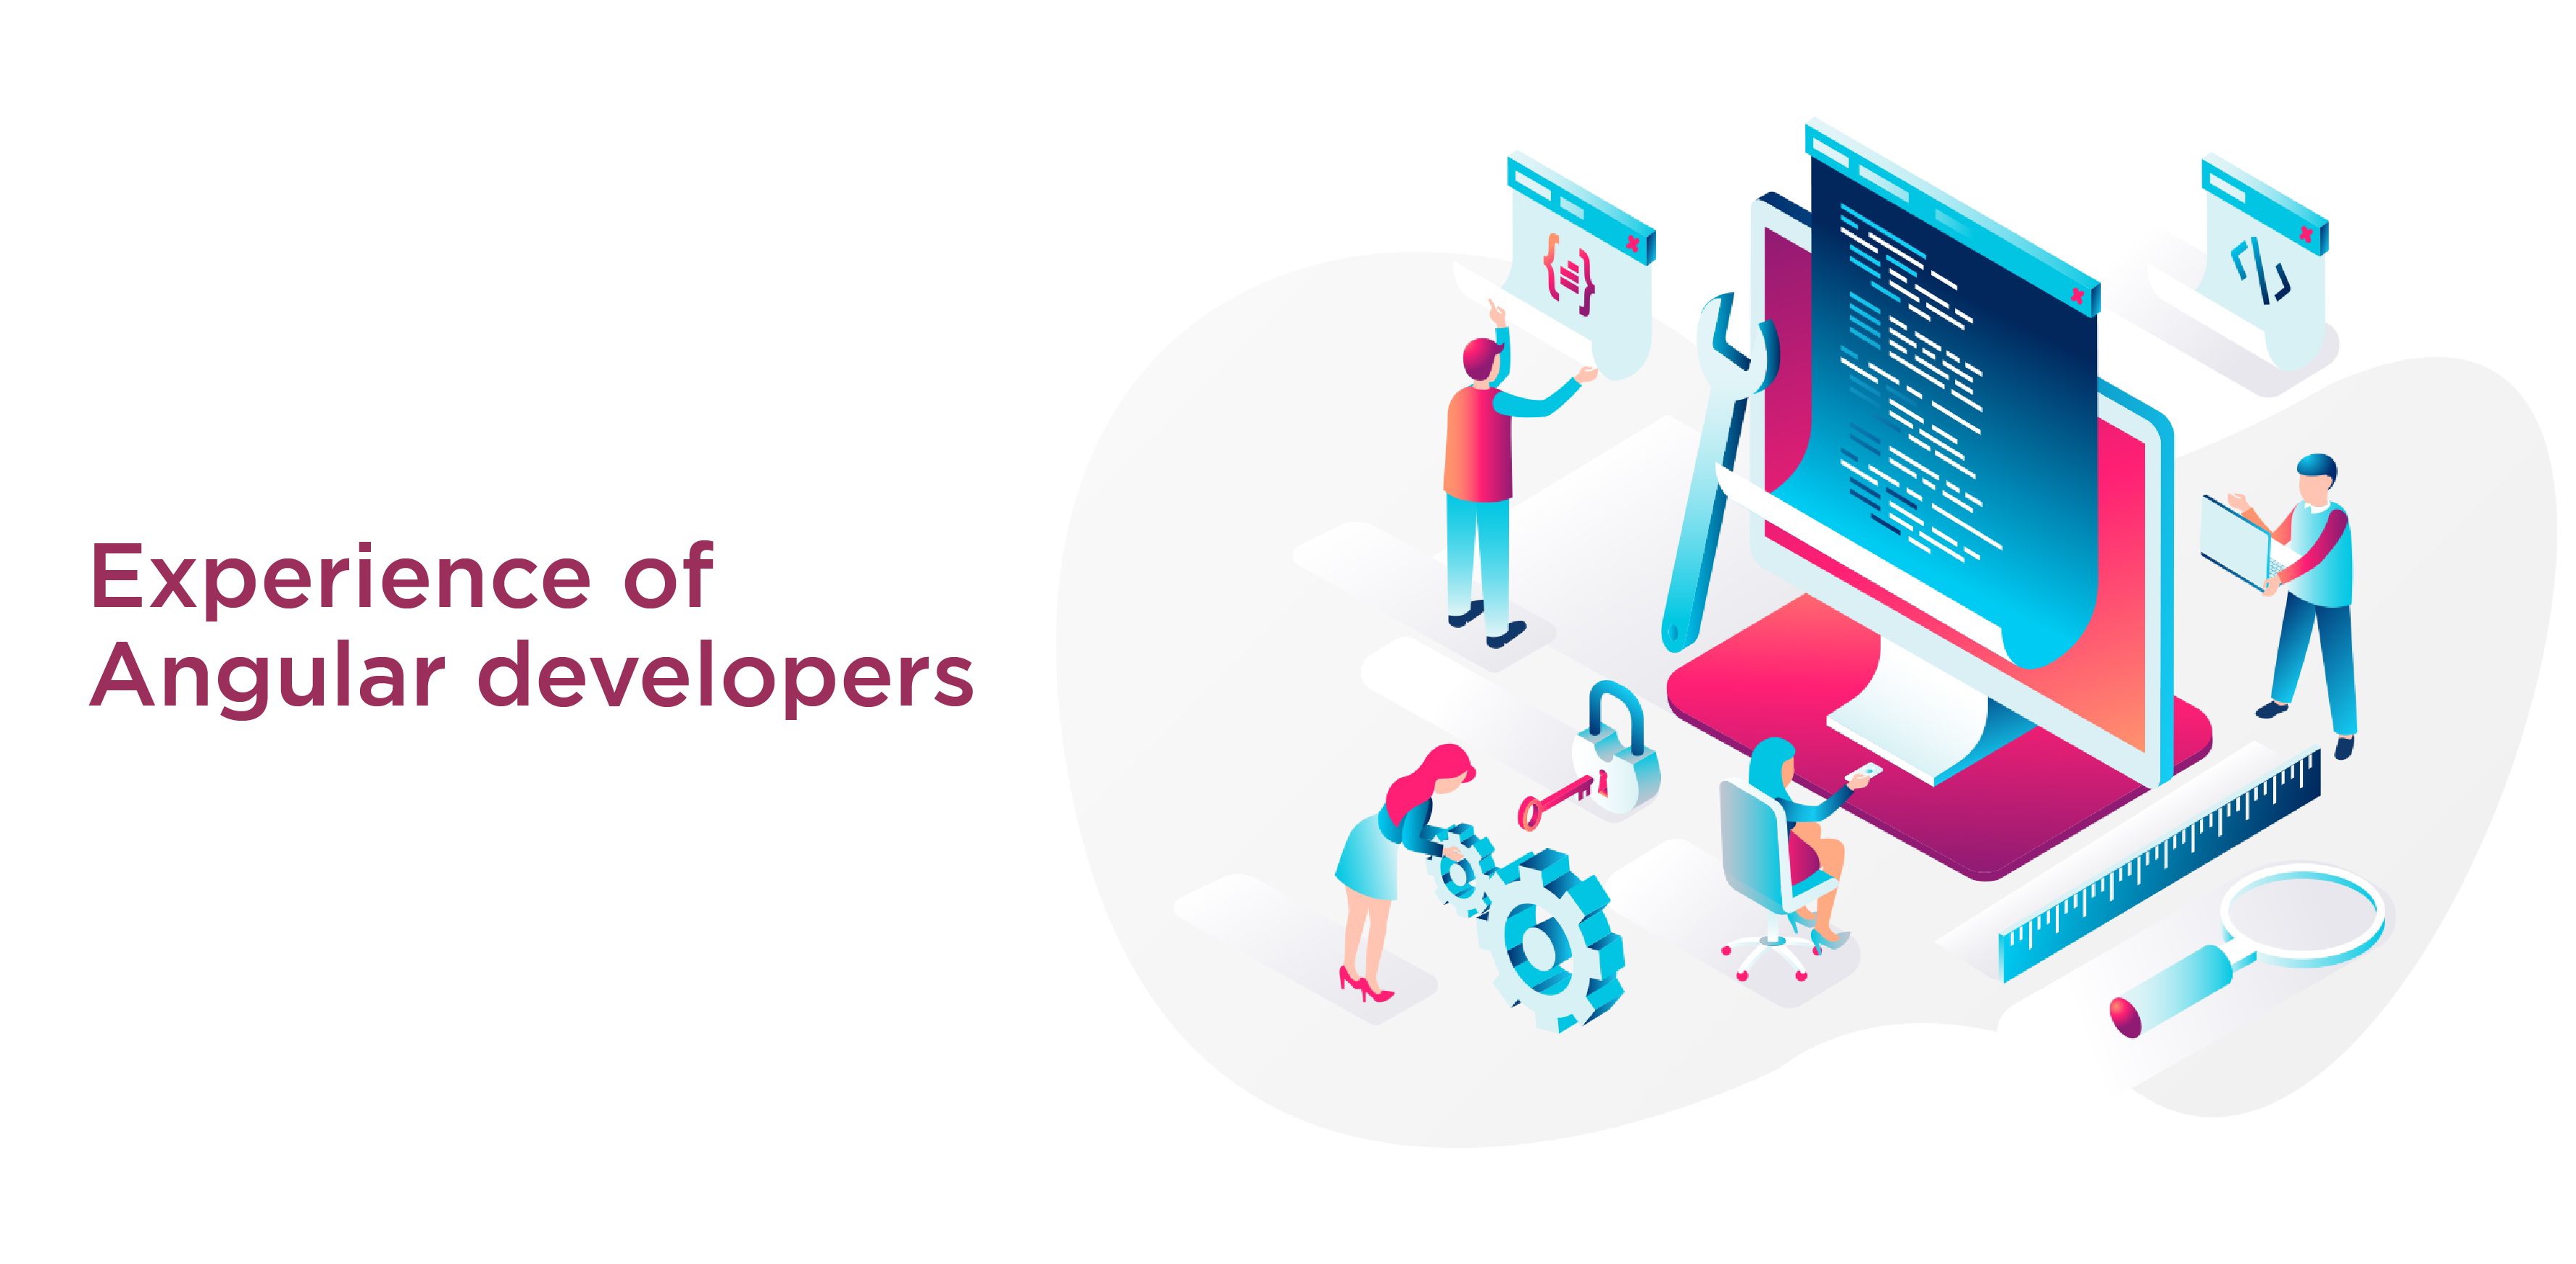 Experience of Angular developers